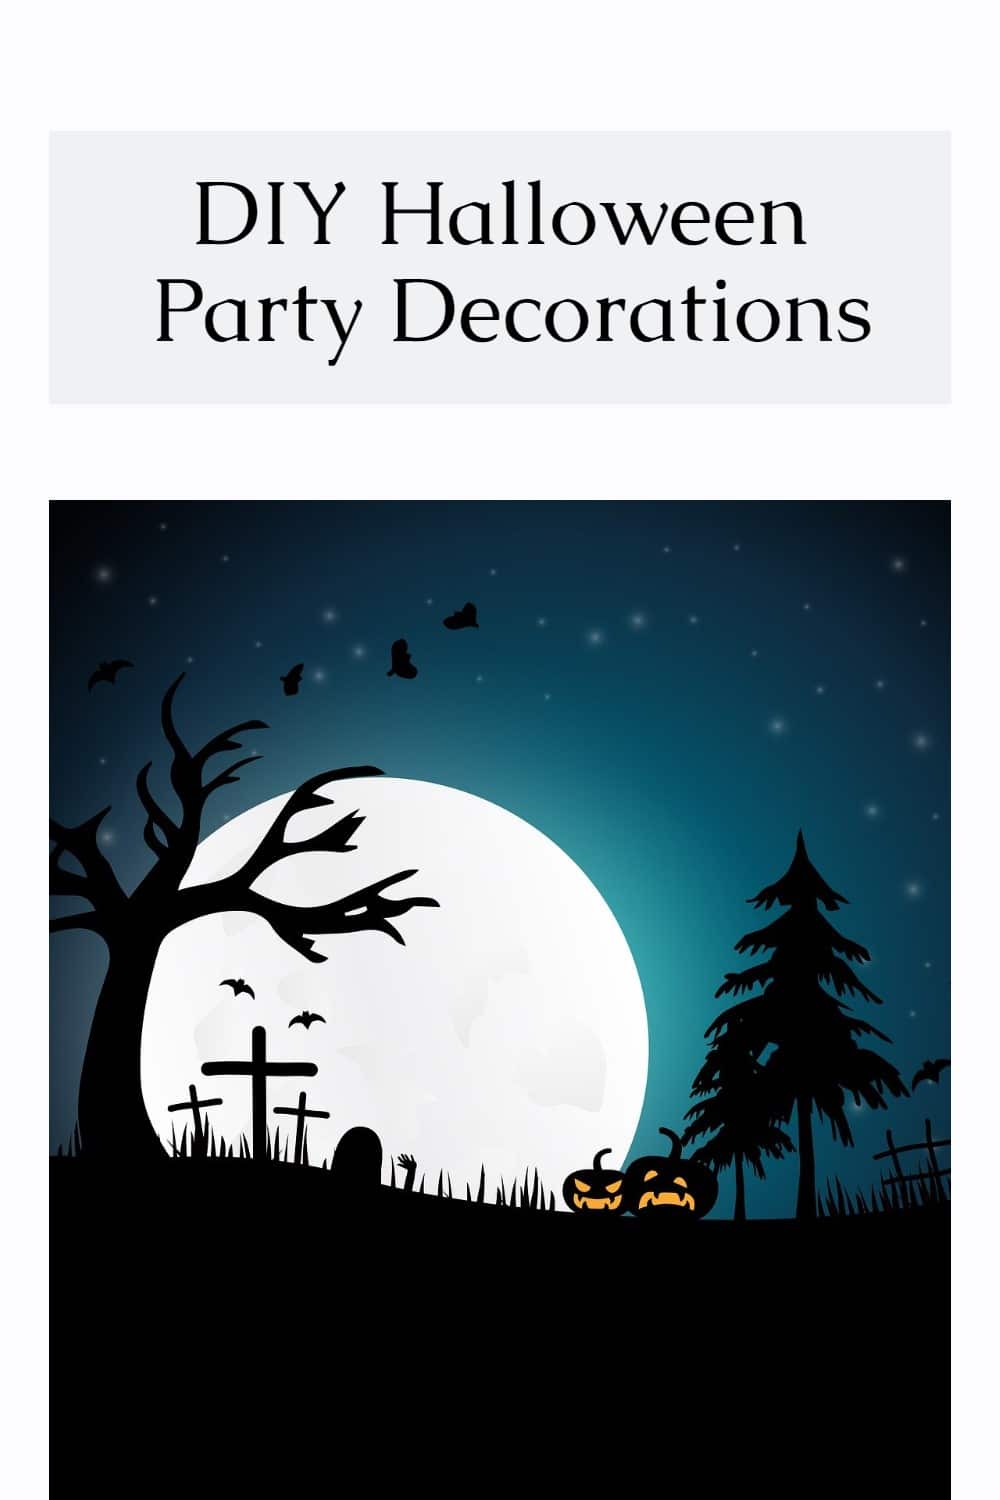 Ideas for DIY Halloween Decorations for you next spooky party. Whether it's fun favors or spooky goodies, you will love these ideas. via @repurposedlife